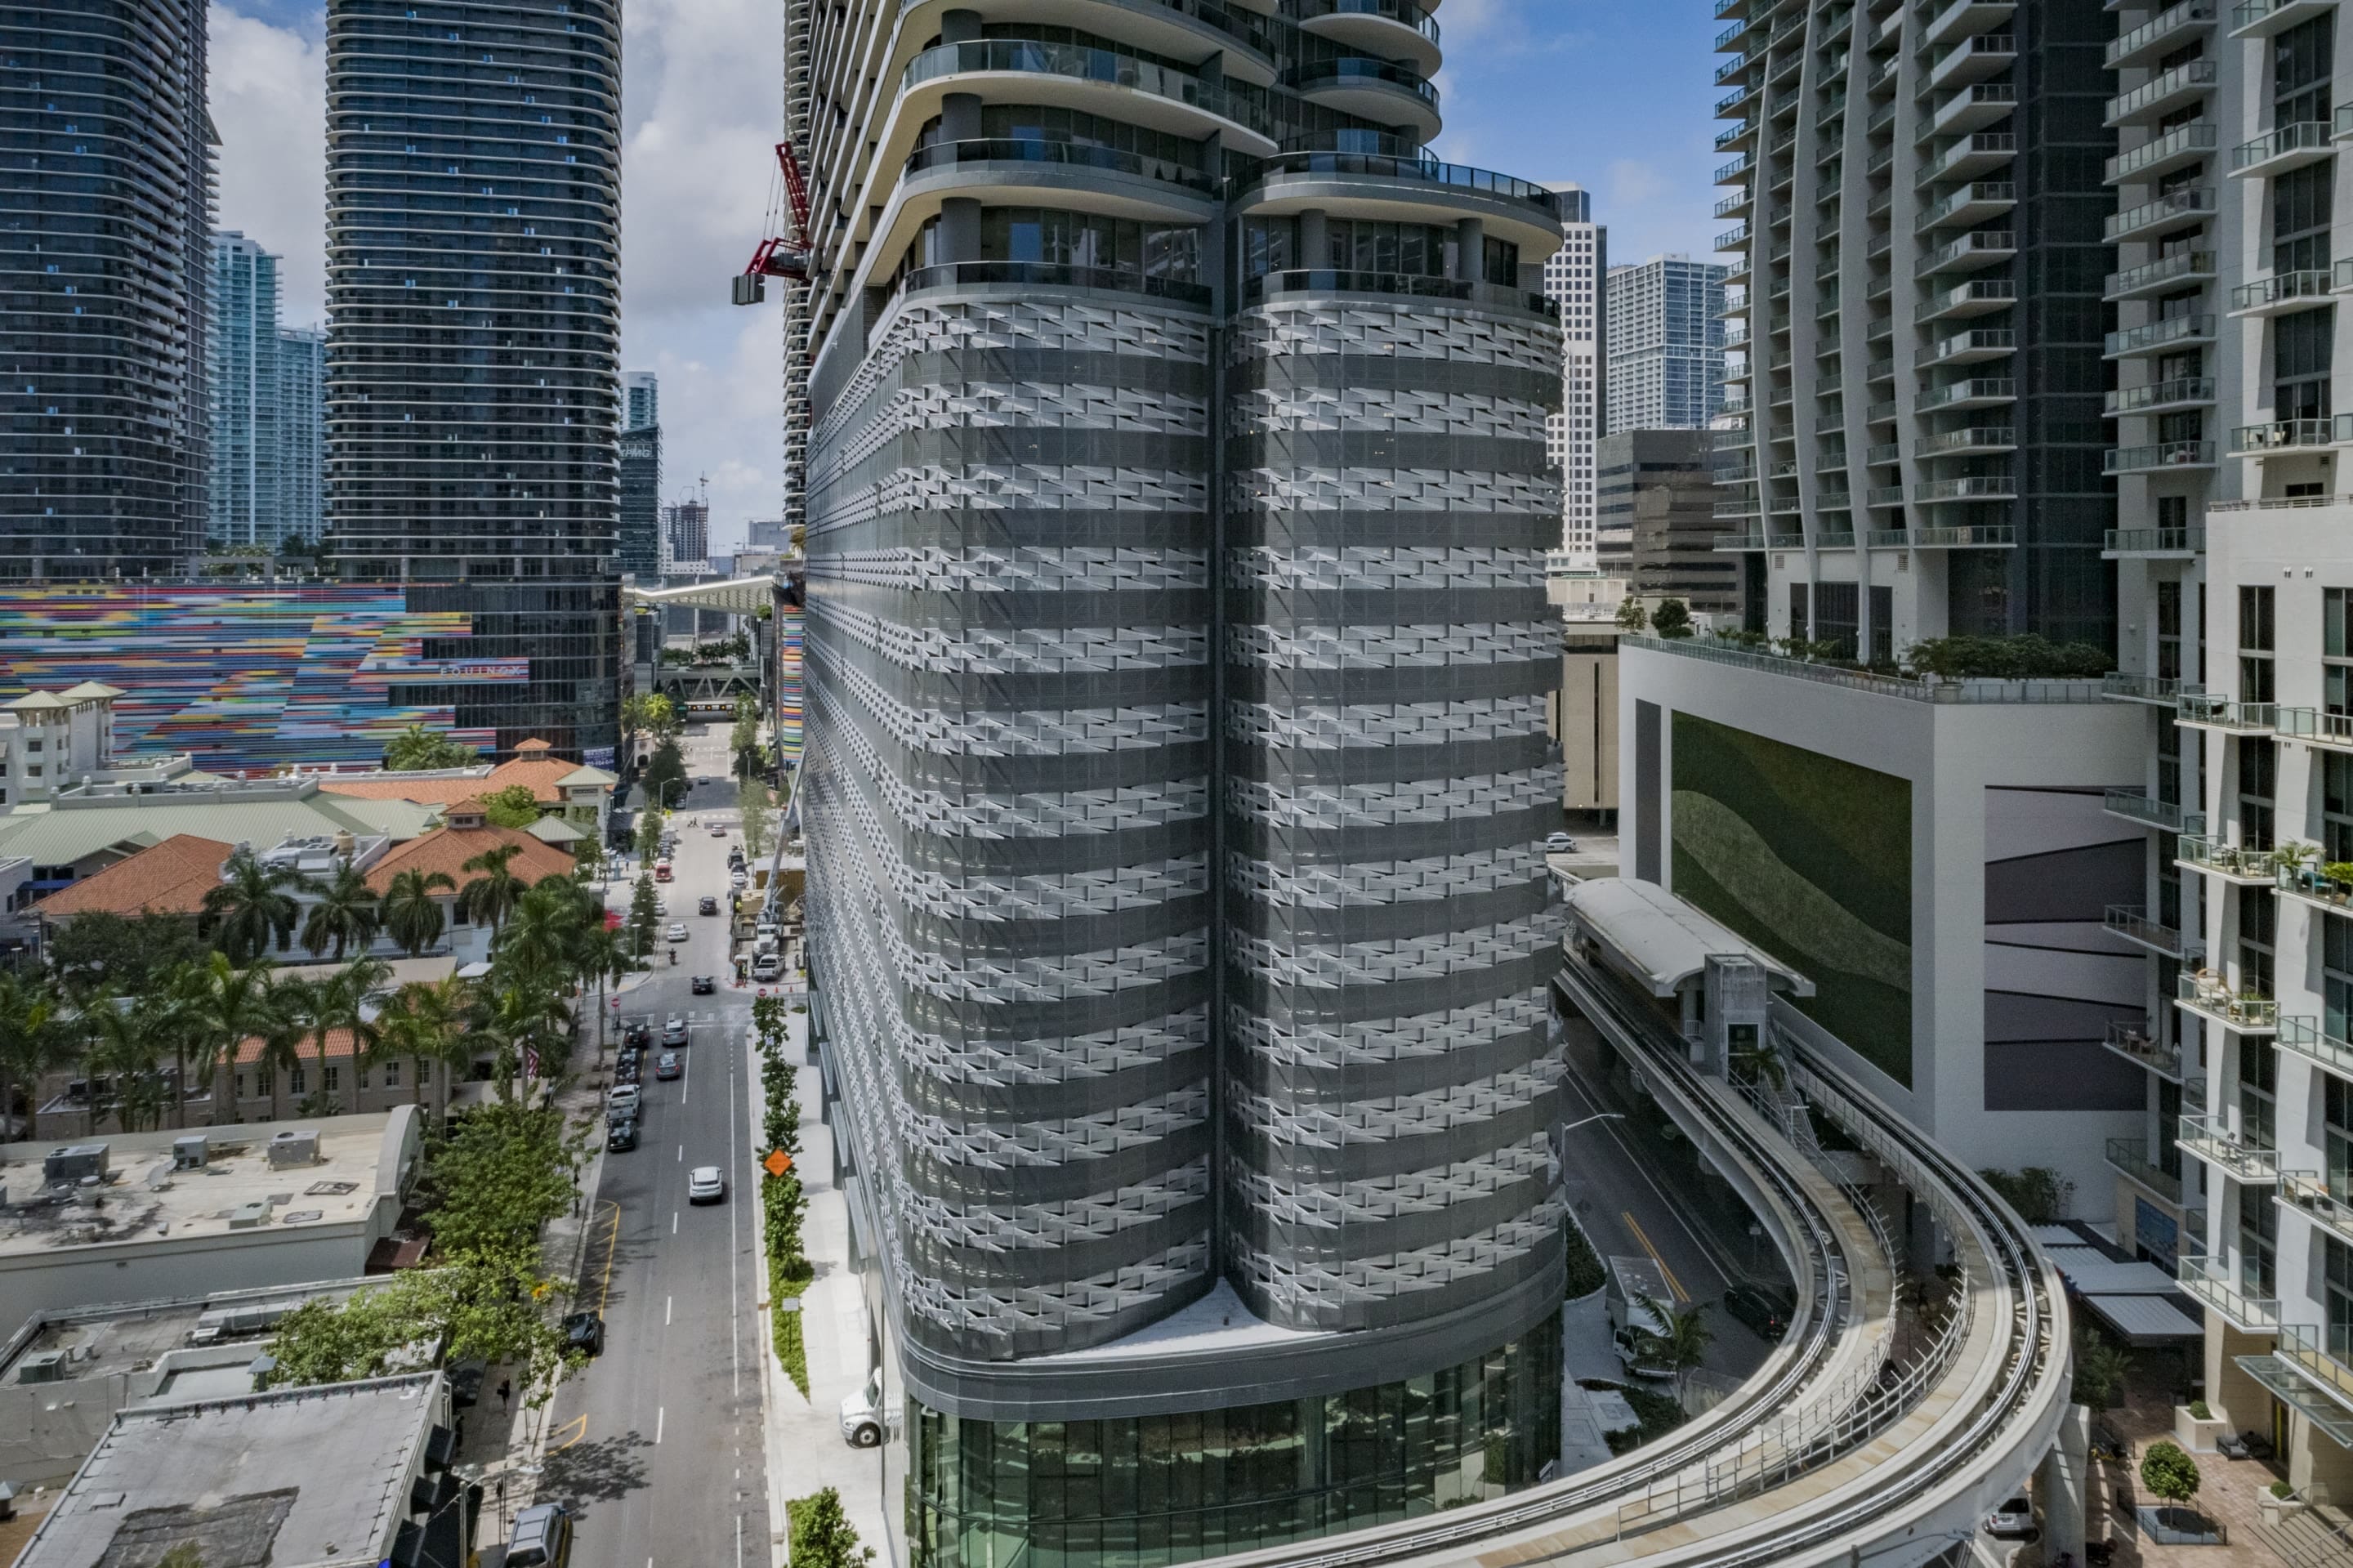 Zahner engineered and fabricated a custom perforated-metal facade for the 13-story Brickell Flatiron Parking Garage.